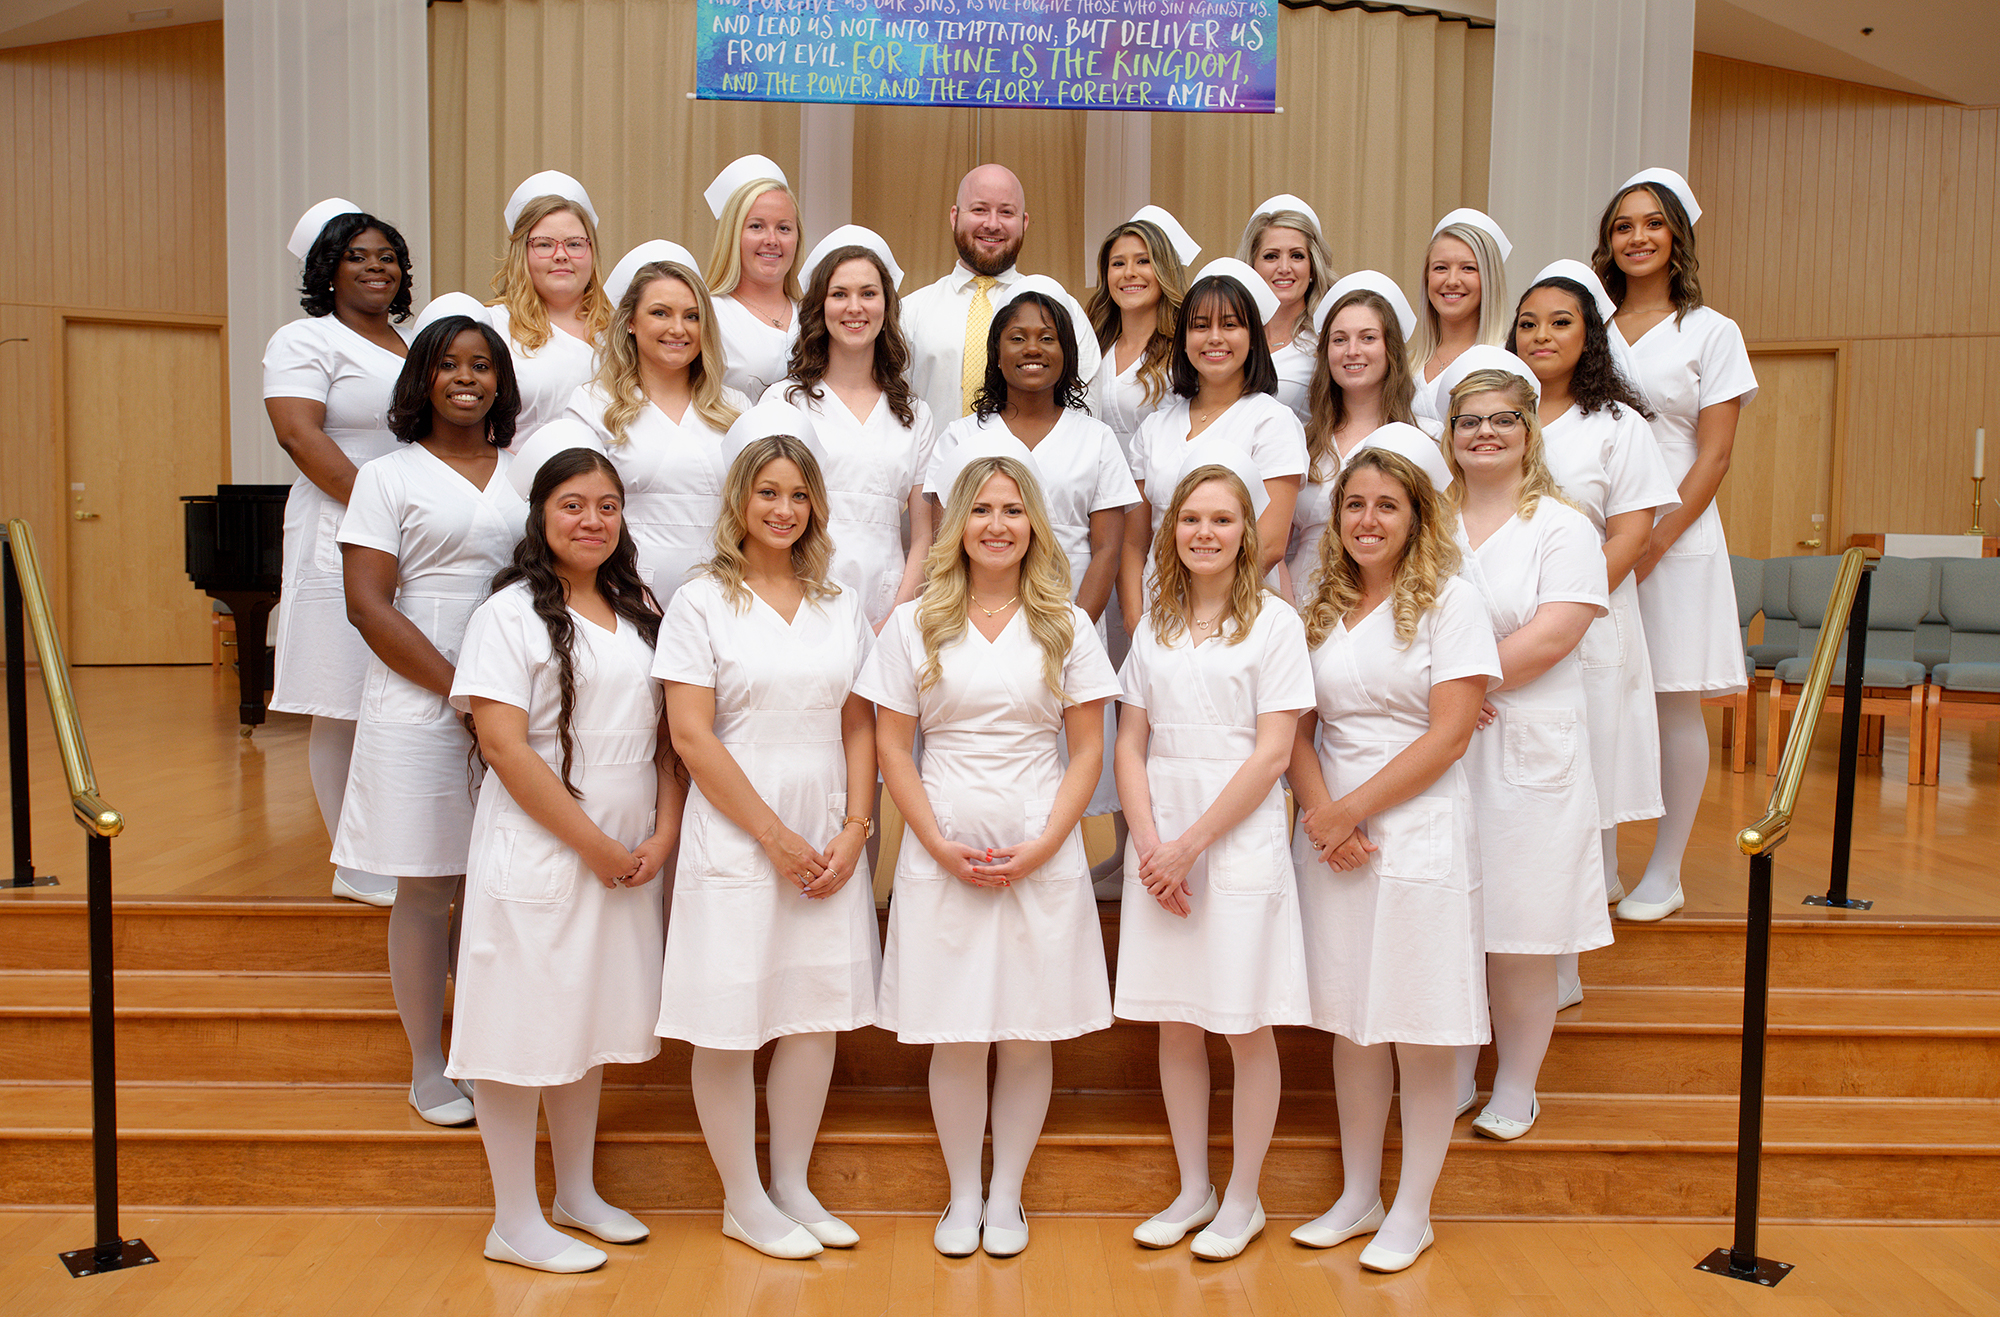 The Margaret H. Rollins School of Nursing class of 2019 ranked No. 1 in the state after the group finished with an 100% pass rate for the NCLEX exam.